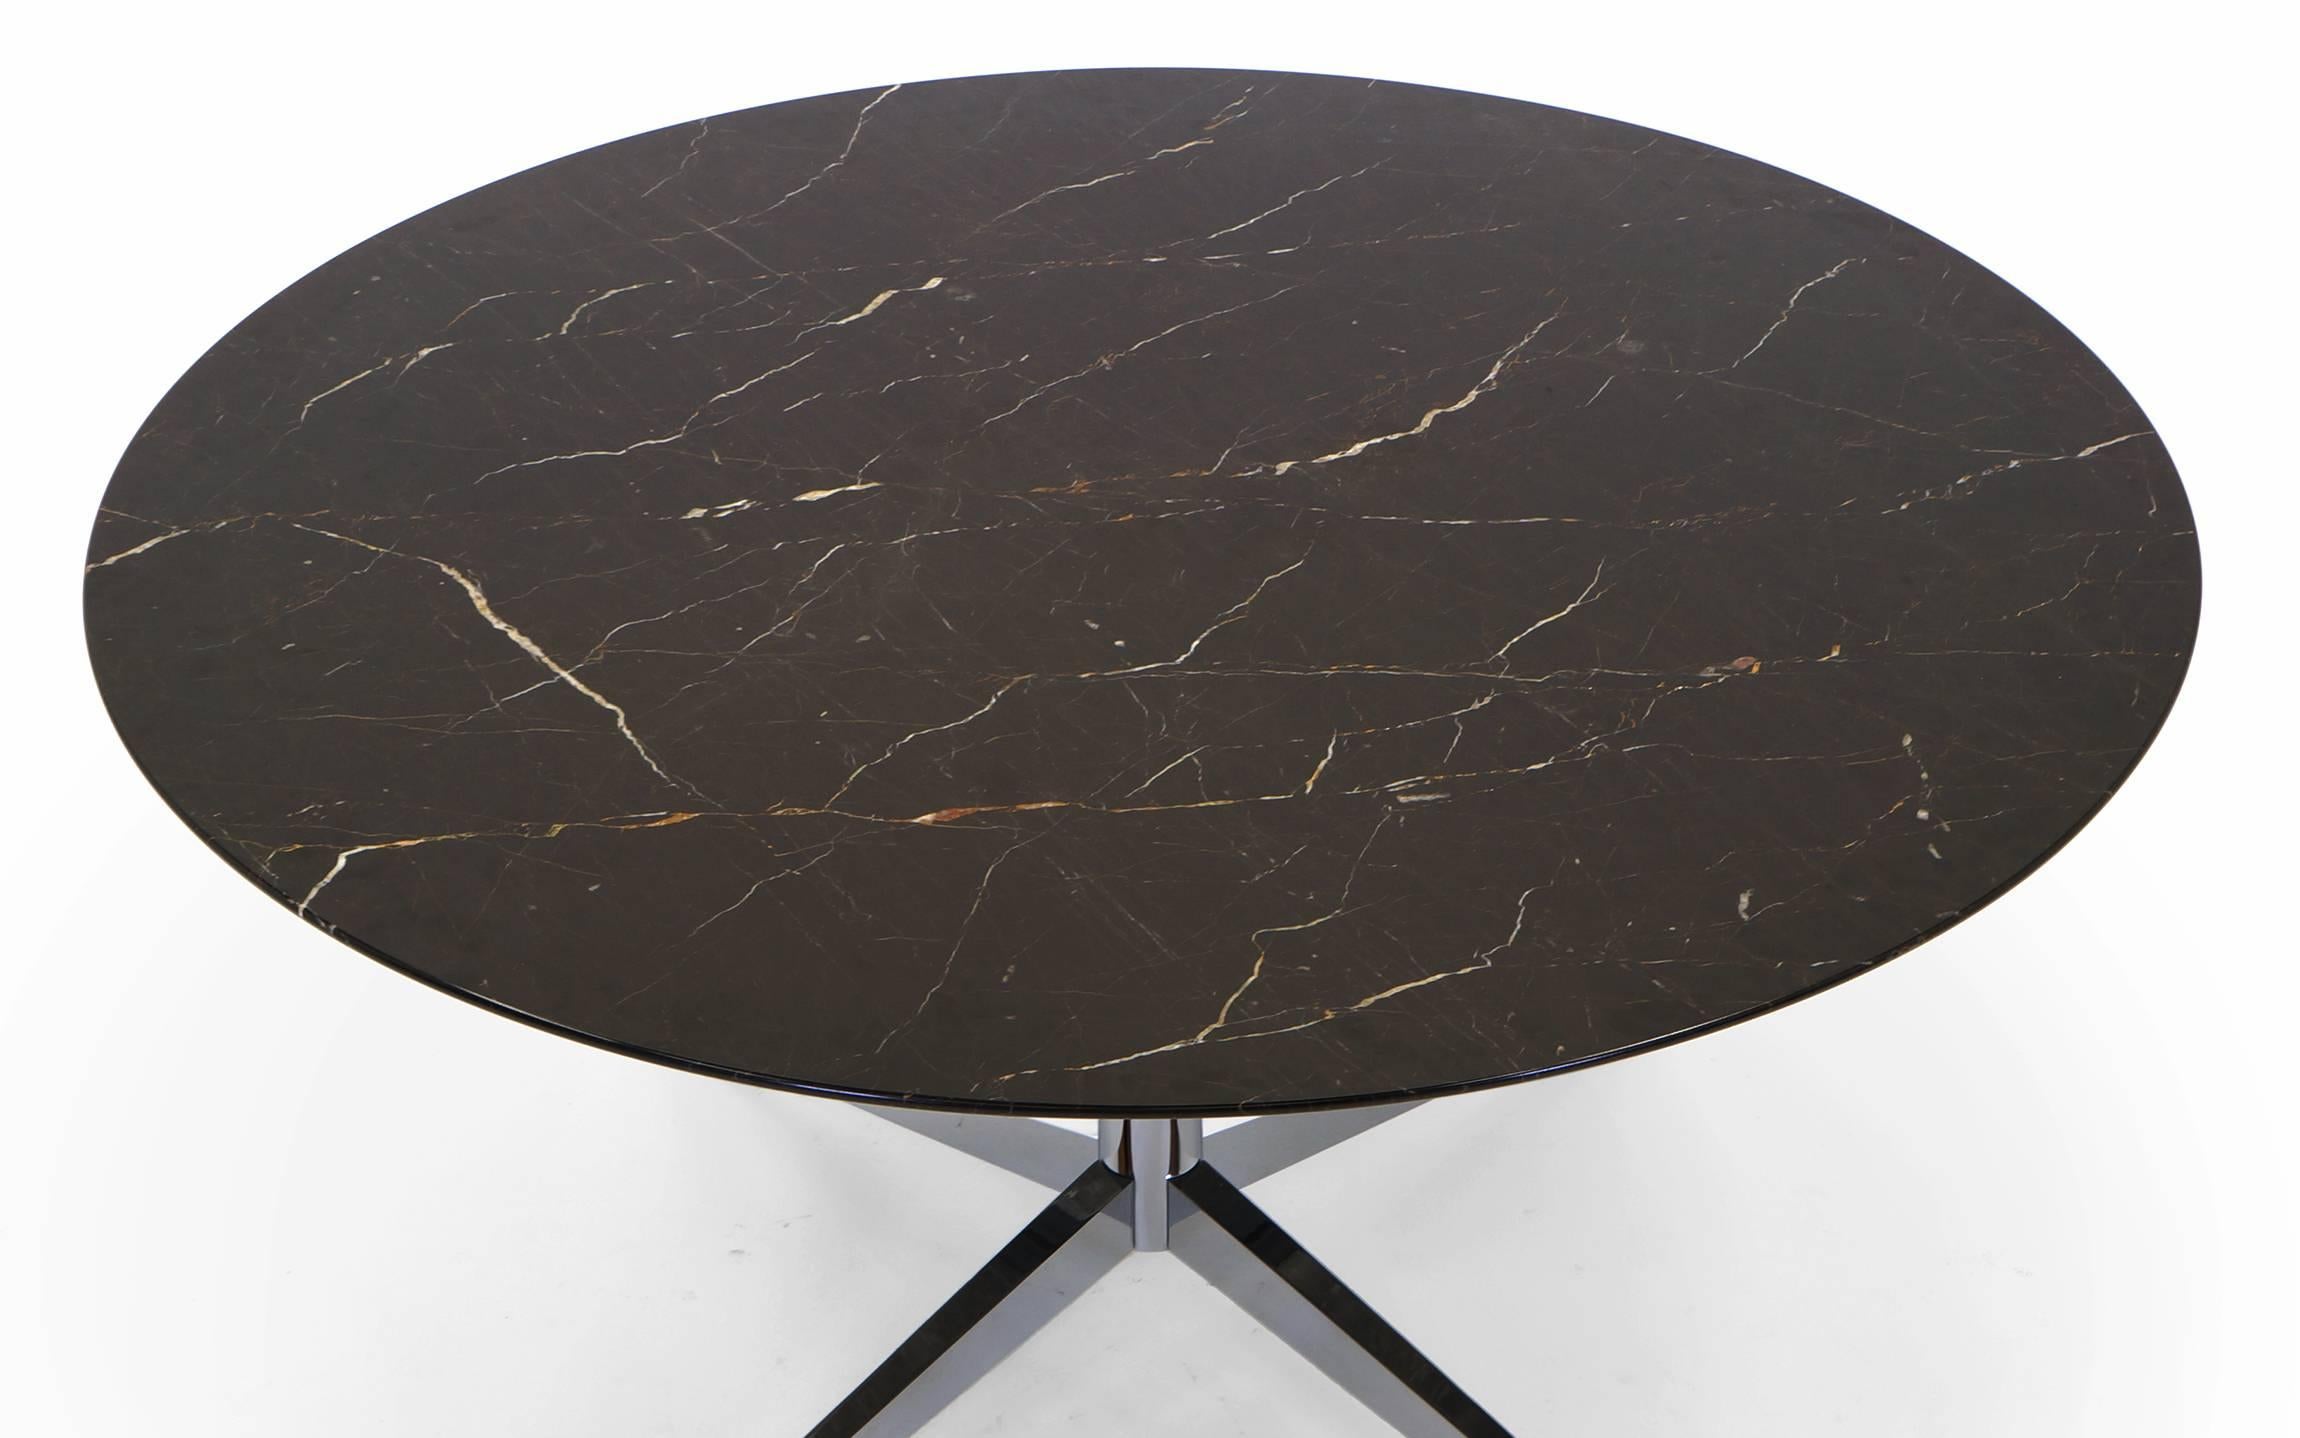 American Florence Knoll Black with White Veining Marble Top Dining Table